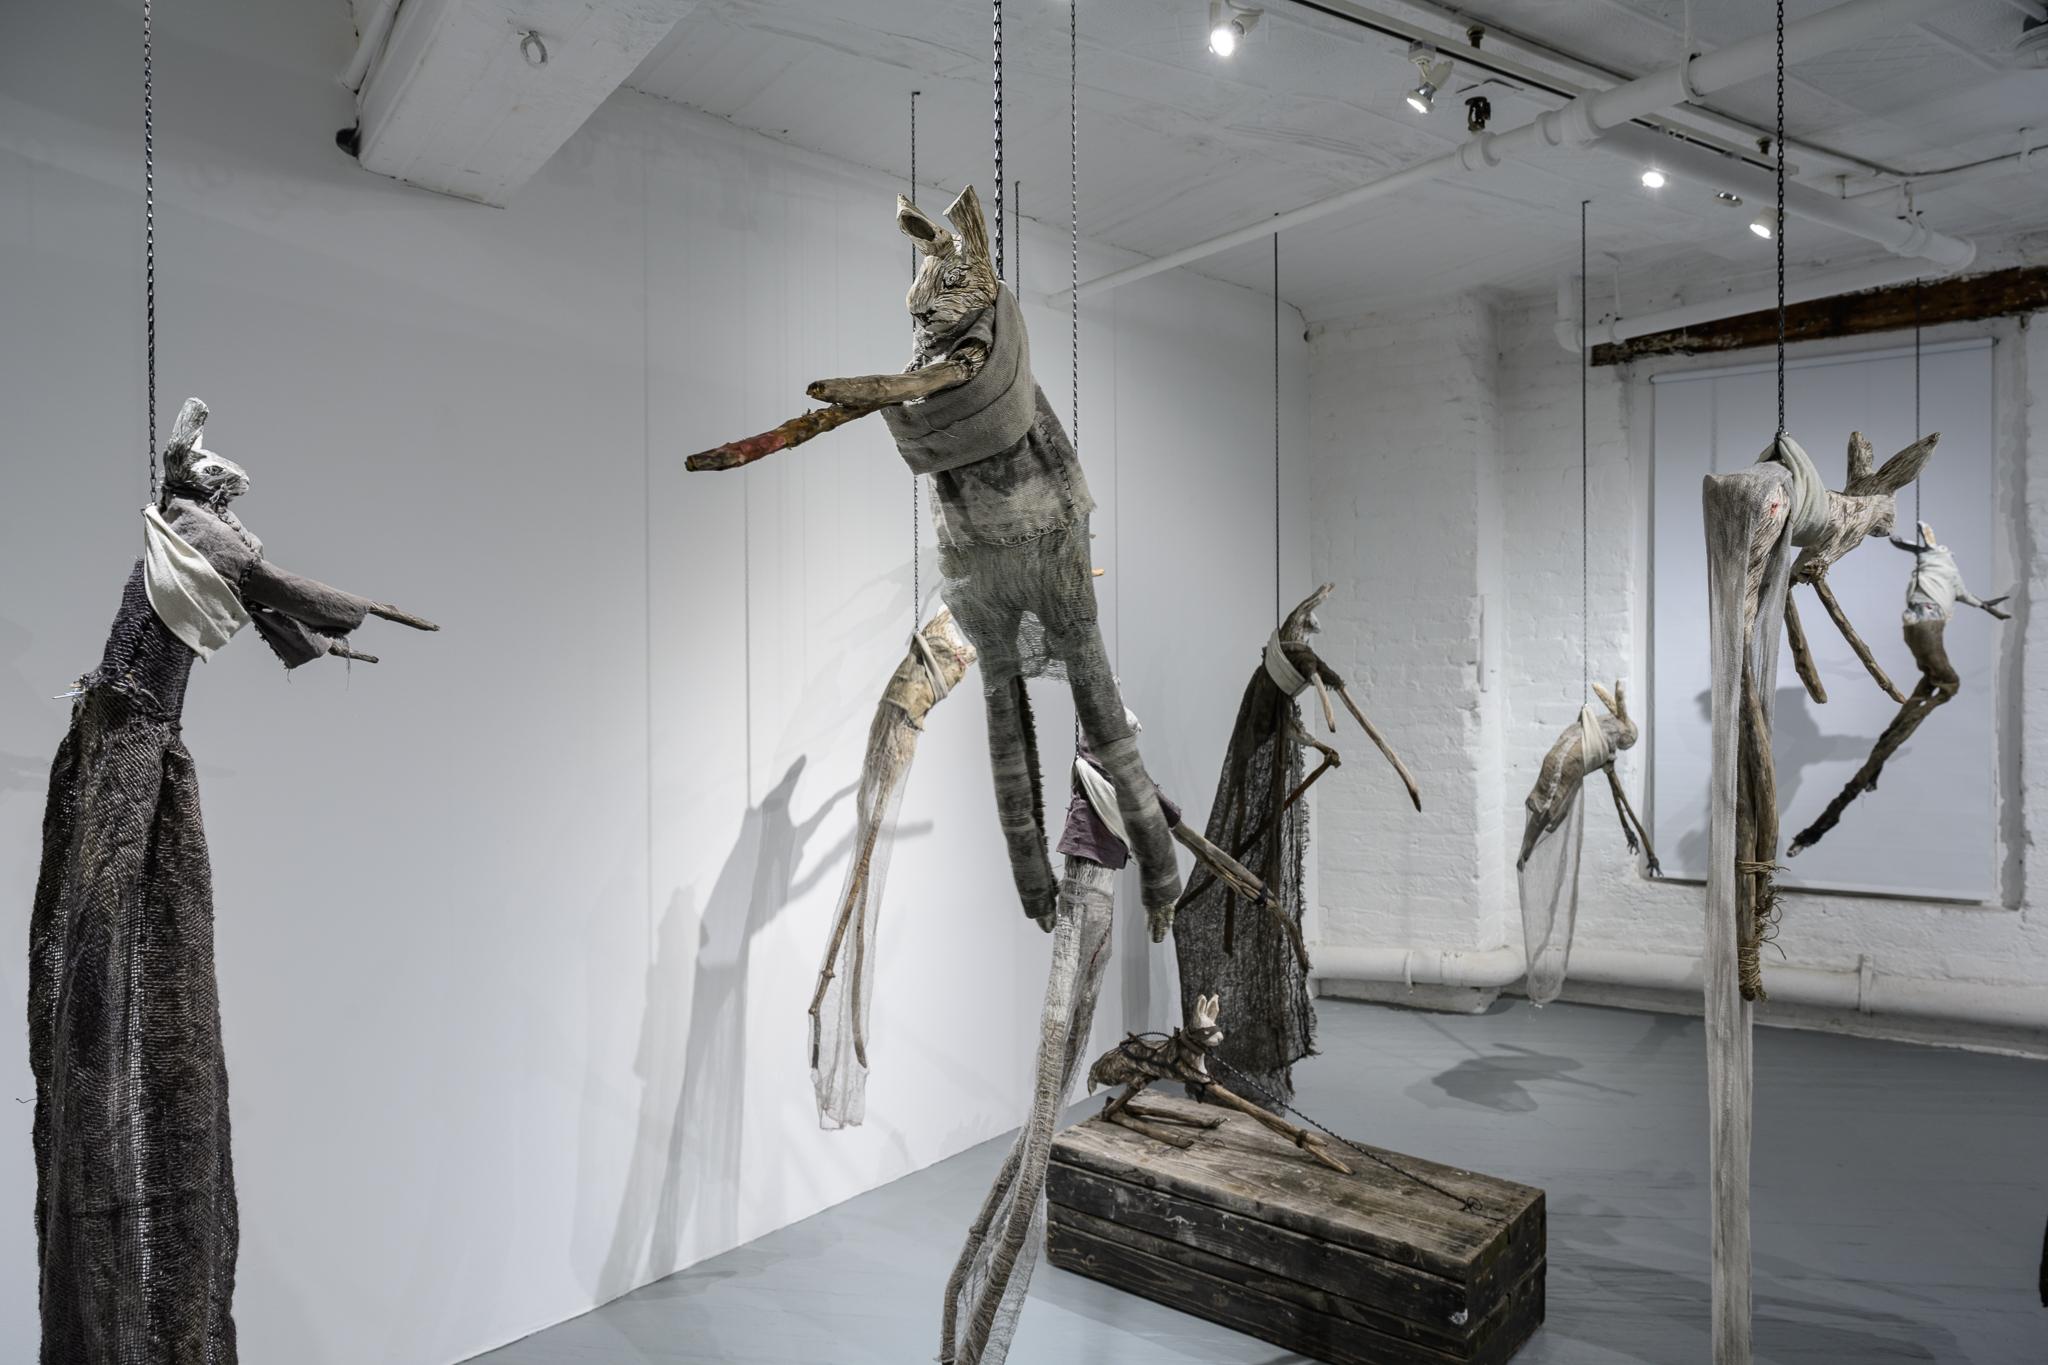 Sculpture of hare suspended from chain: 'Children 10' - Contemporary Mixed Media Art by Elizabeth Jordan